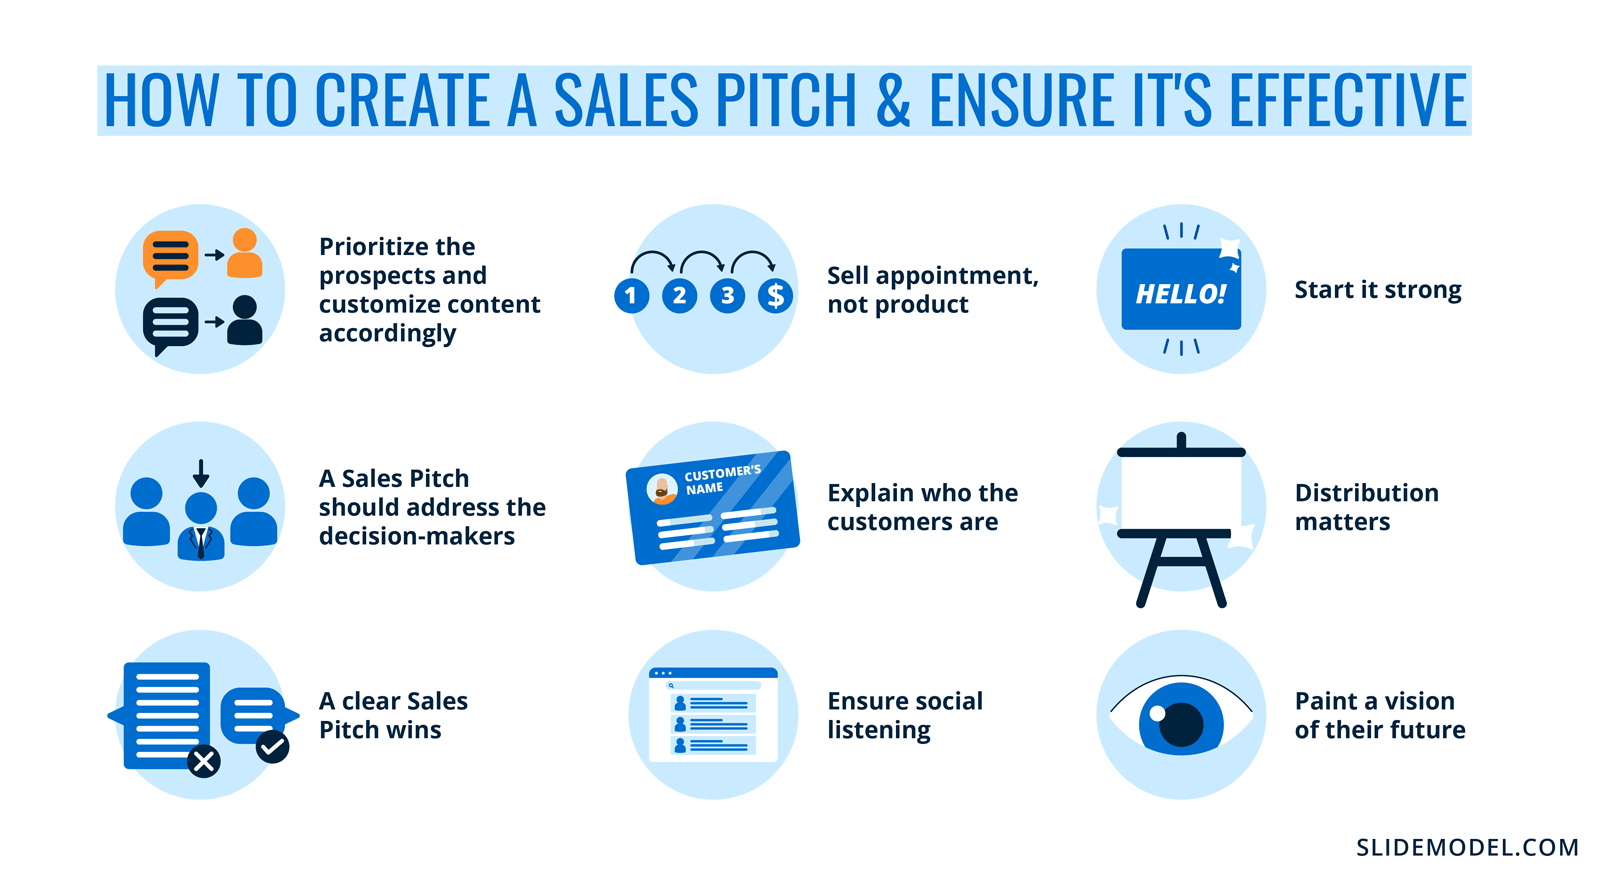 How to Create a Sales Pitch & Ensure It's Effective